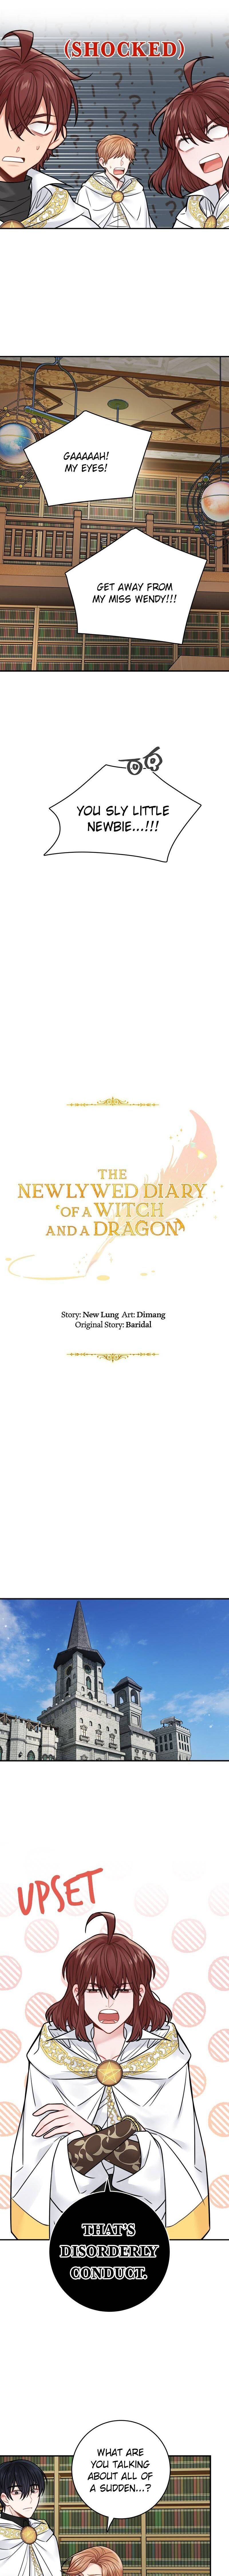 The Newlywed Life Of A Witch And A Dragon 75 7